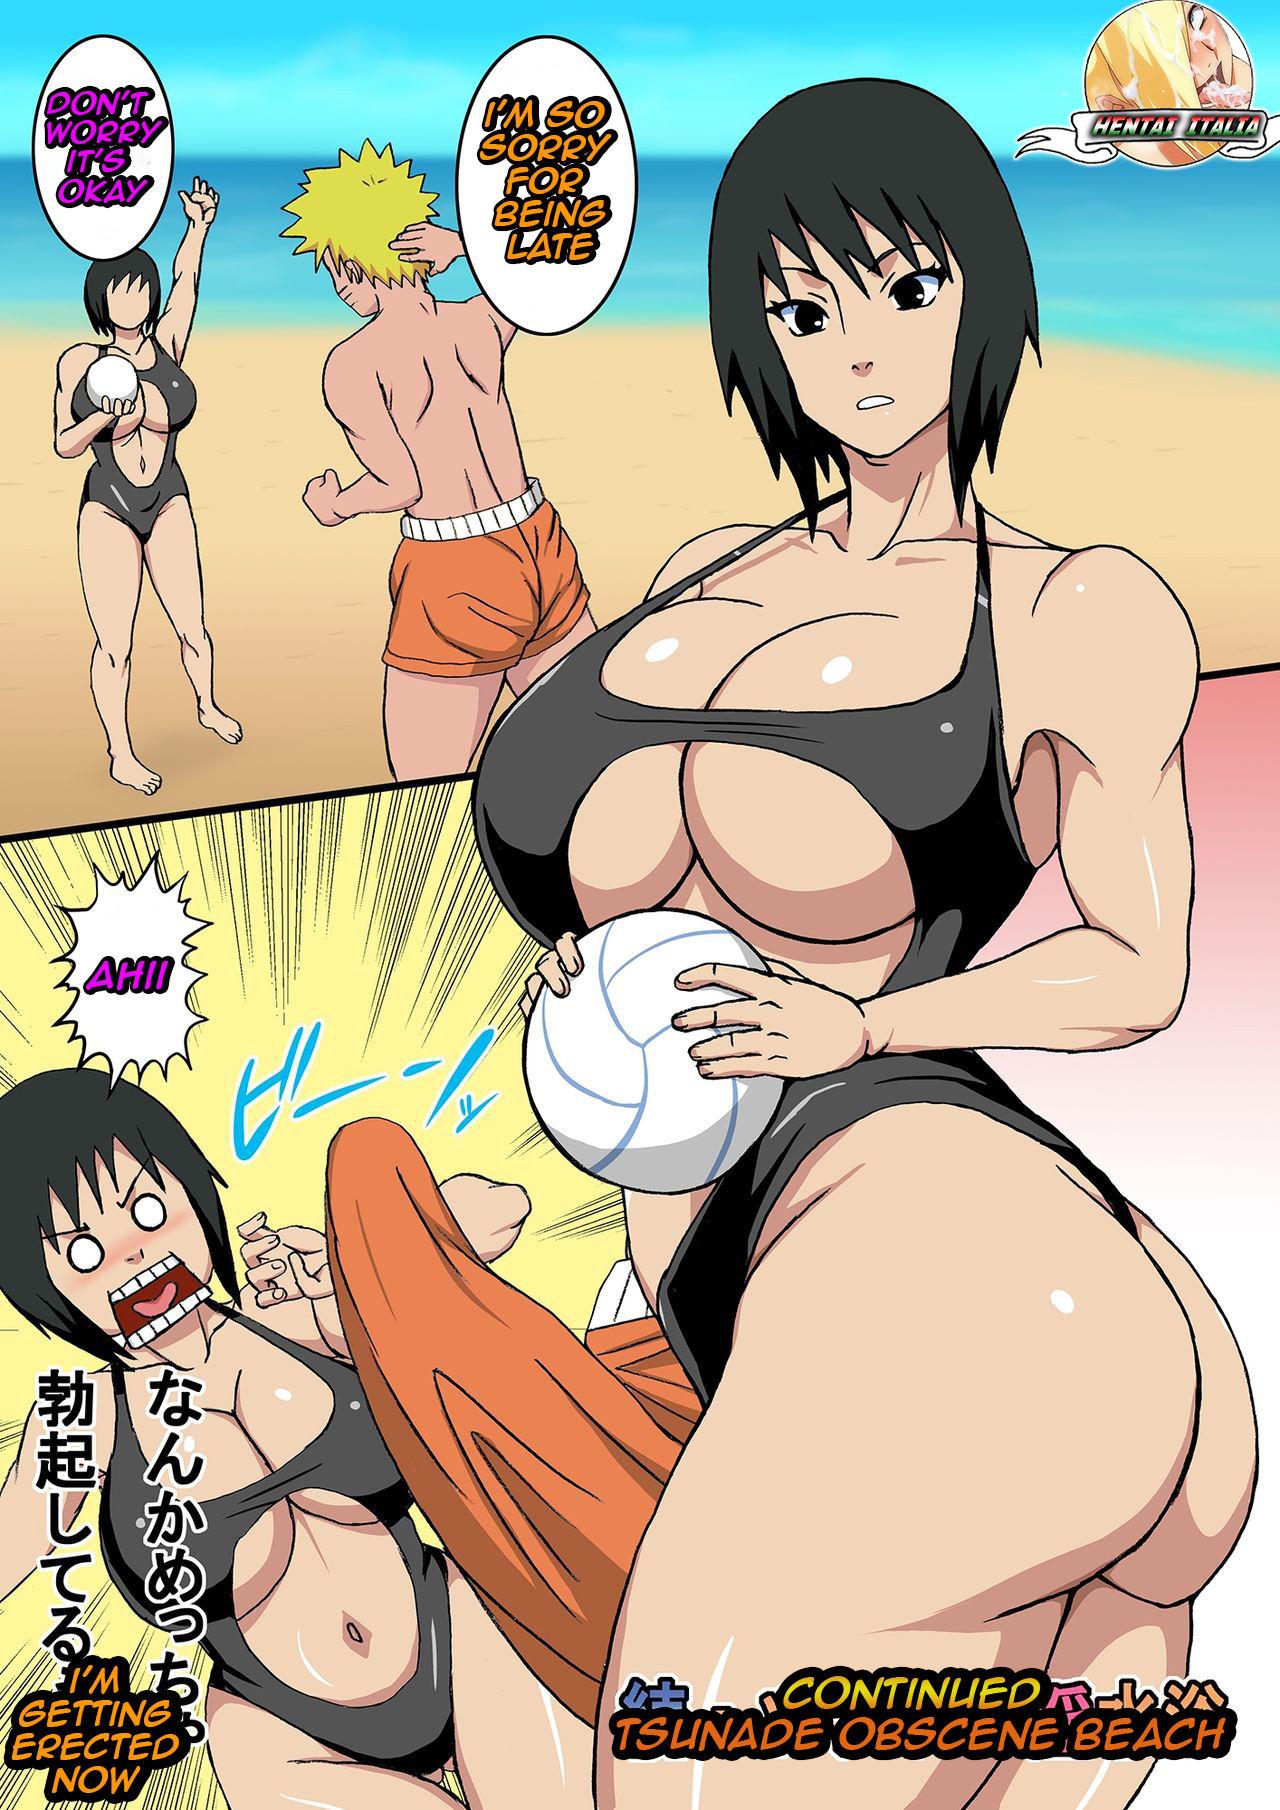 Pussy Licking After Tsunade's Obscene Beach - Naruto Porra - Page 3